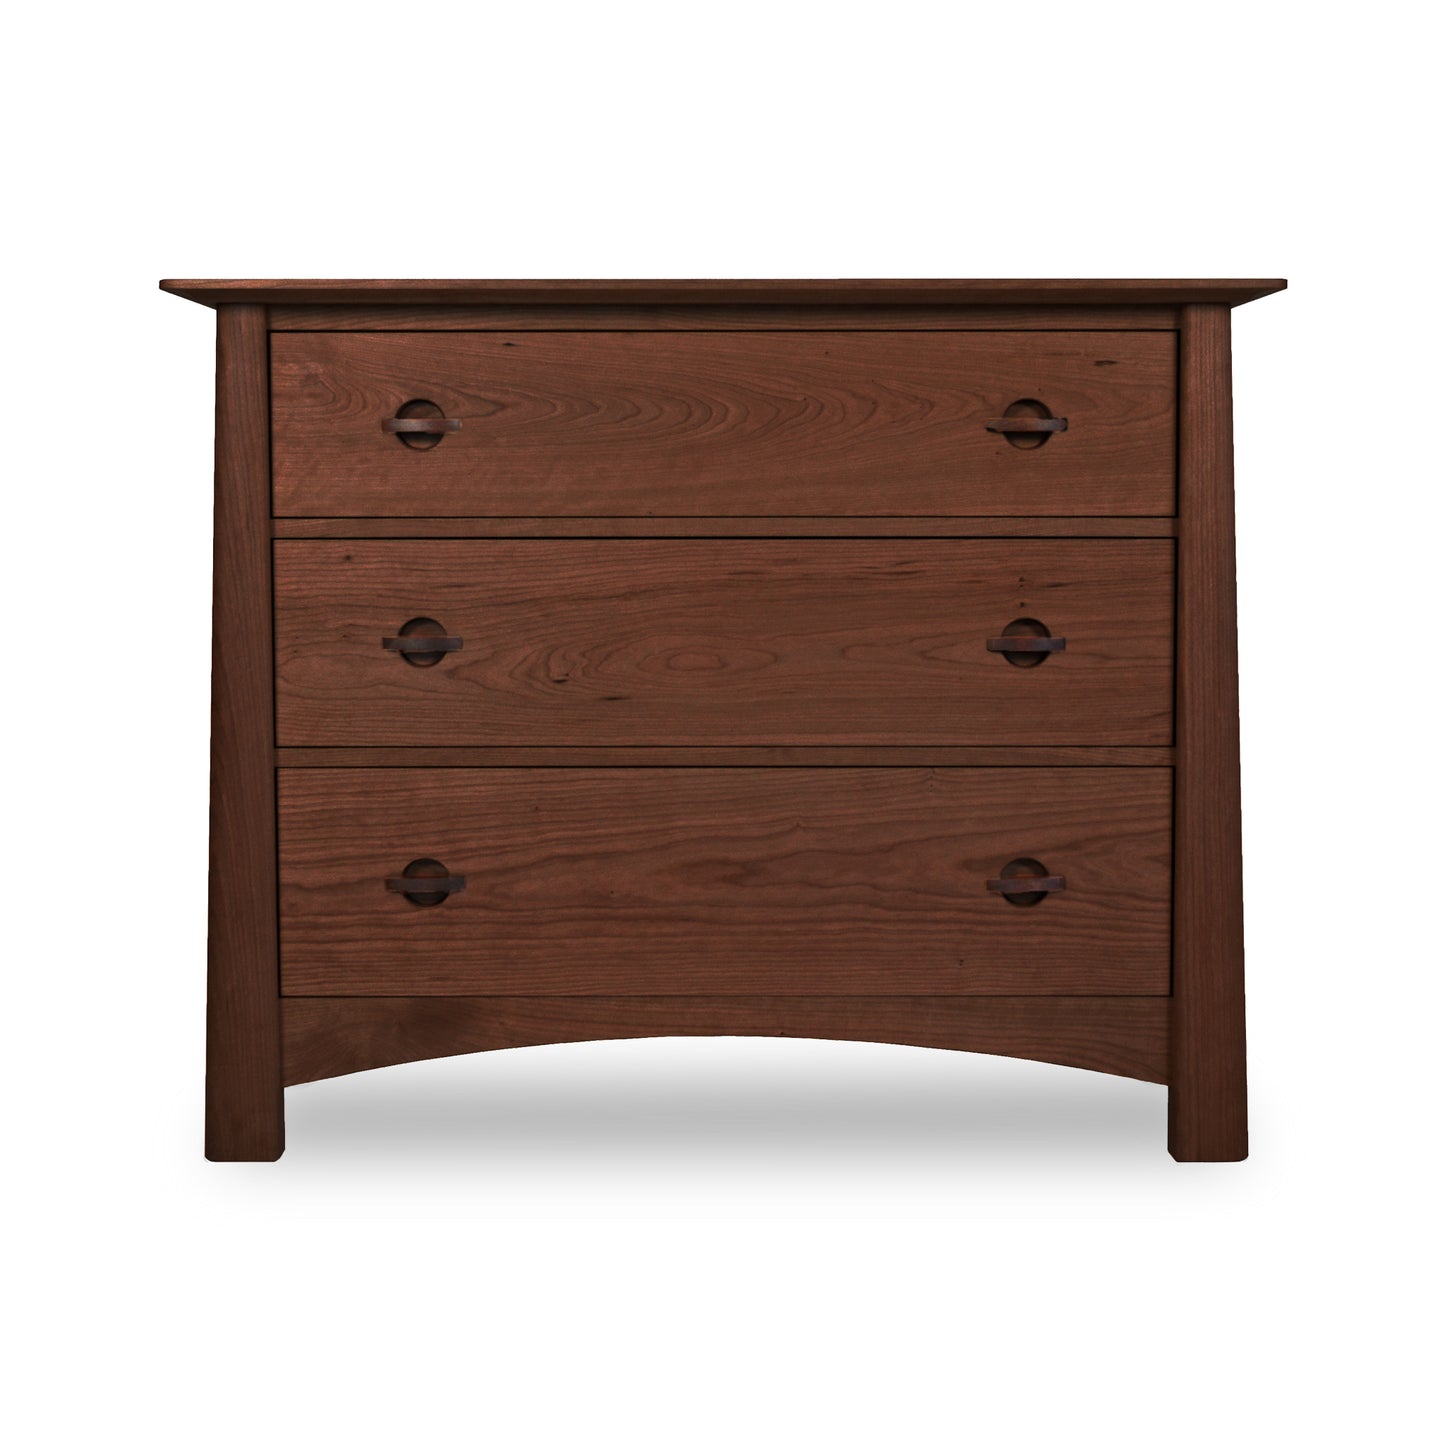 A Maple Corner Woodworks Cherry Moon 3-Drawer Chest made from sustainable hardwoods, with round knobs against a white background.